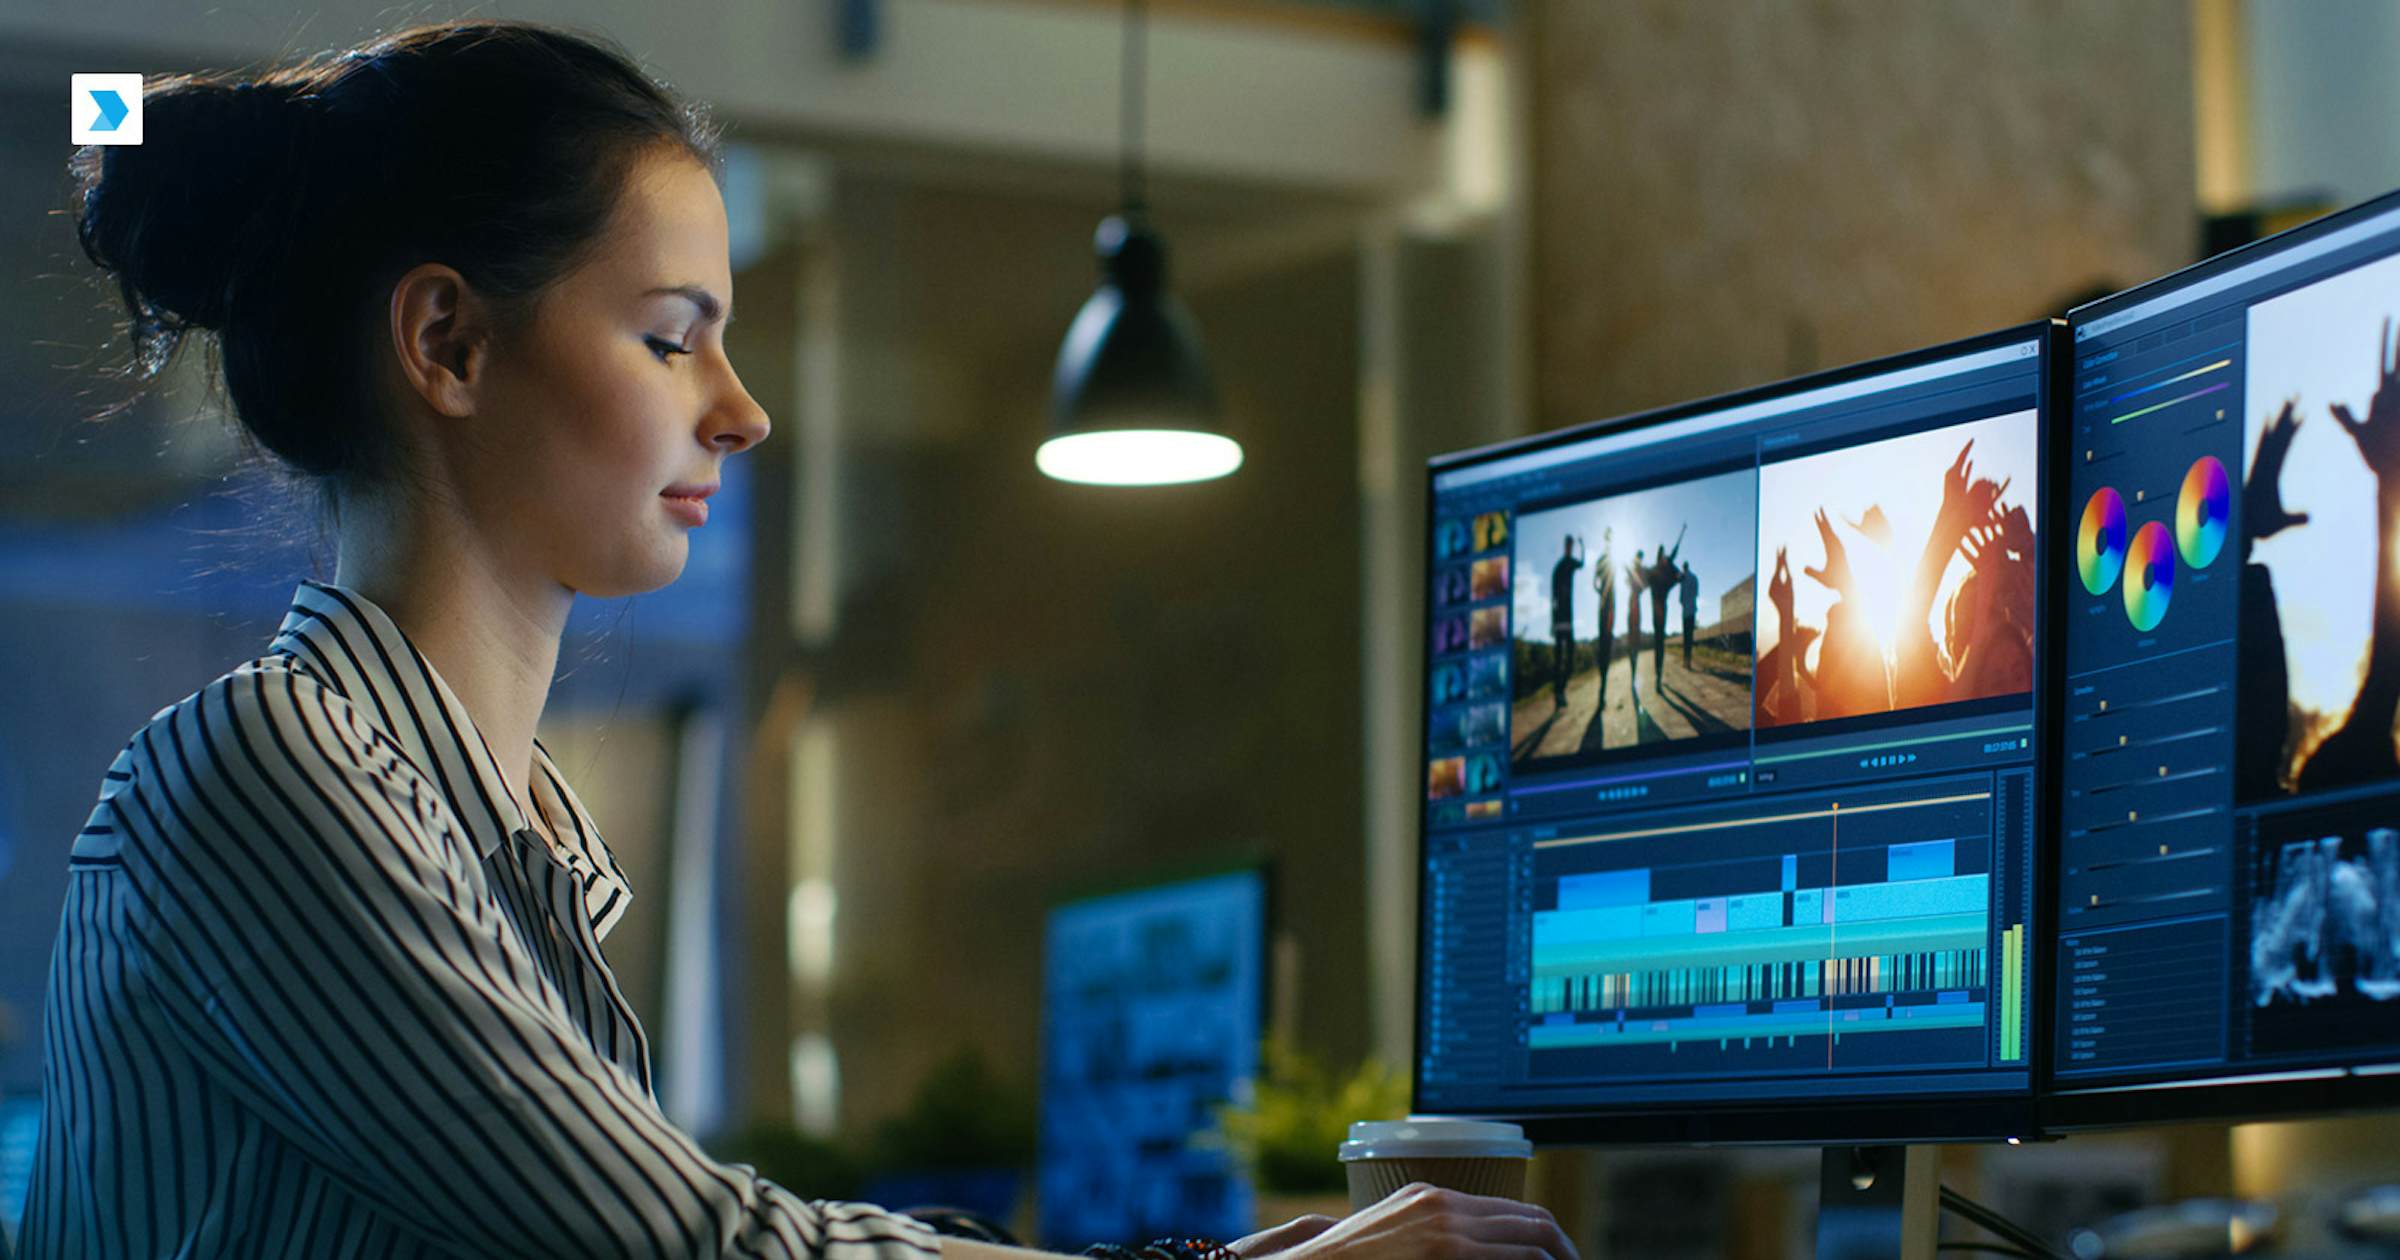 10 Video Editing Tools for Small Business.jpg?crop=edges&fit=crop&fm=jpg&h=1260&ixlib=php 3.3